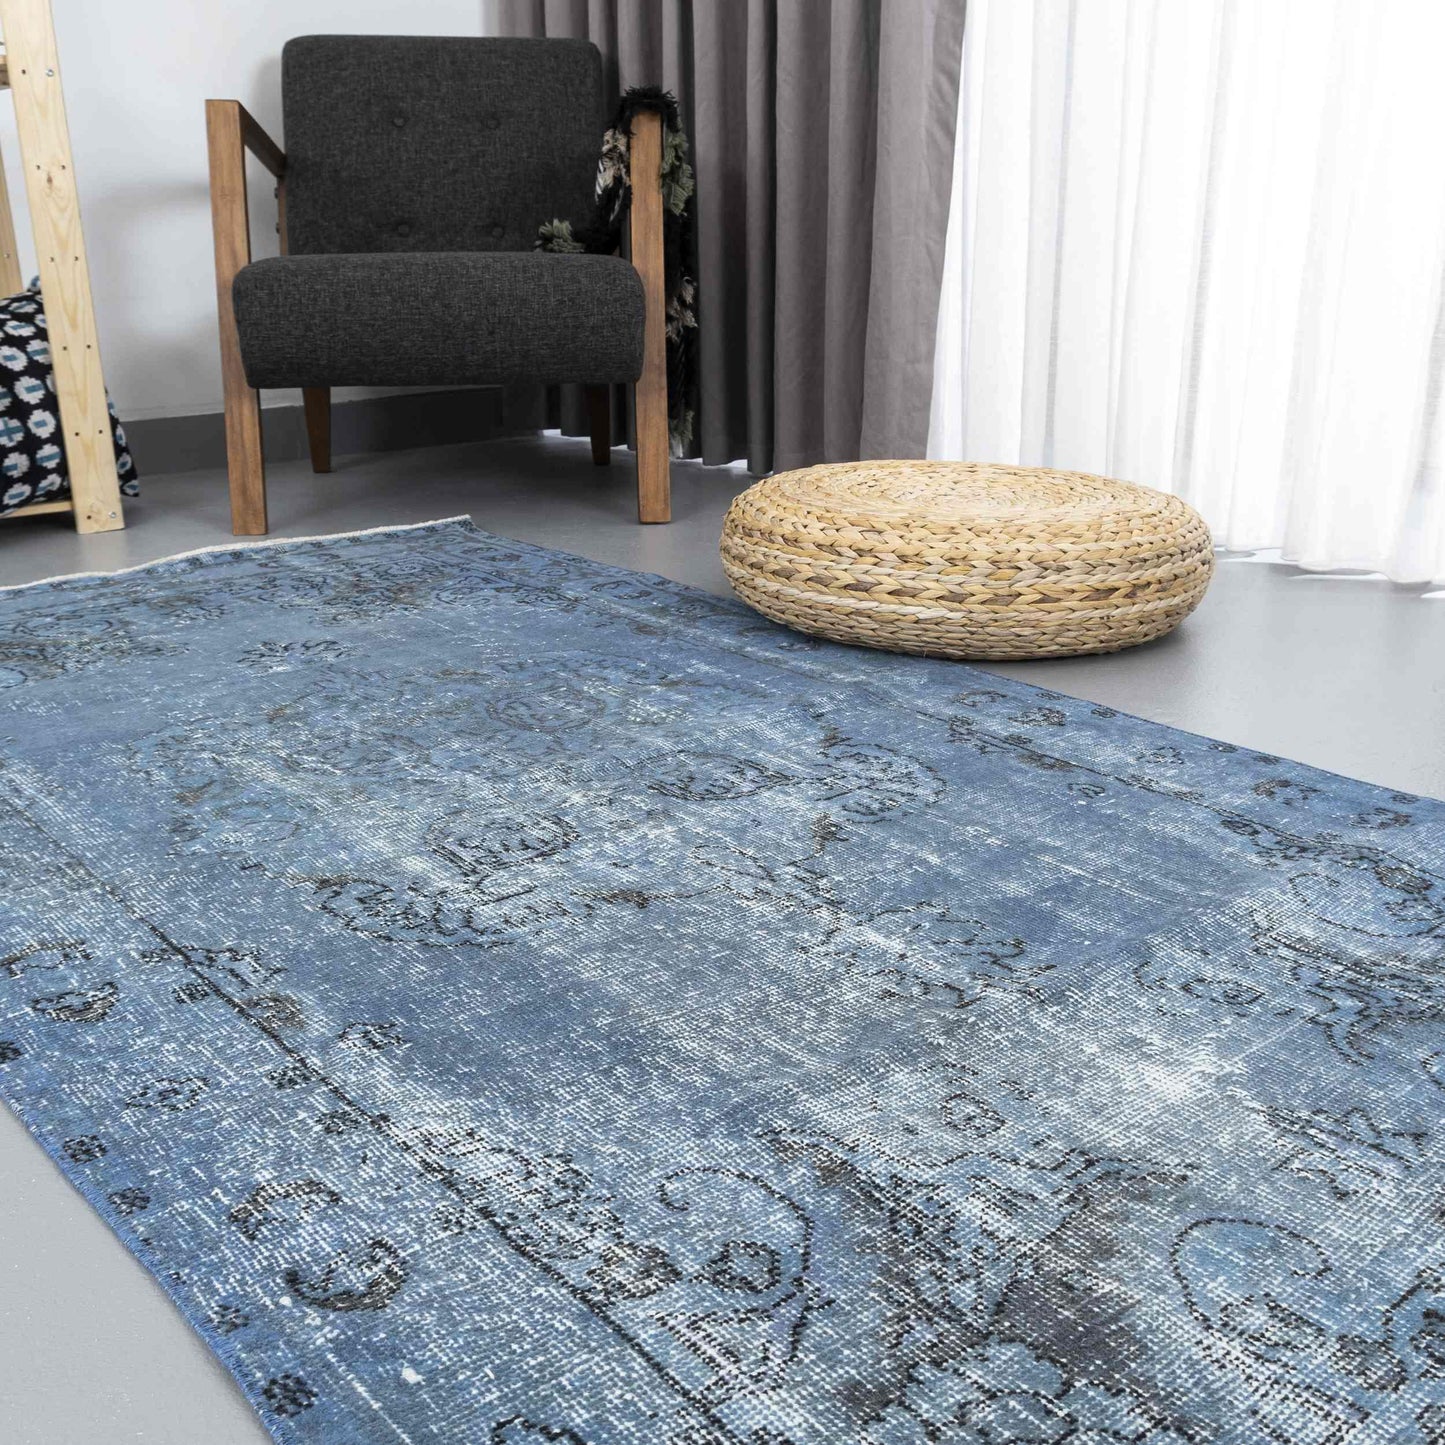 Oriental Rug Vintage Hand Knotted Wool On Cotton 110 x 210 Cm - 3' 8'' x 6' 11'' Navy Blue C012 ER01